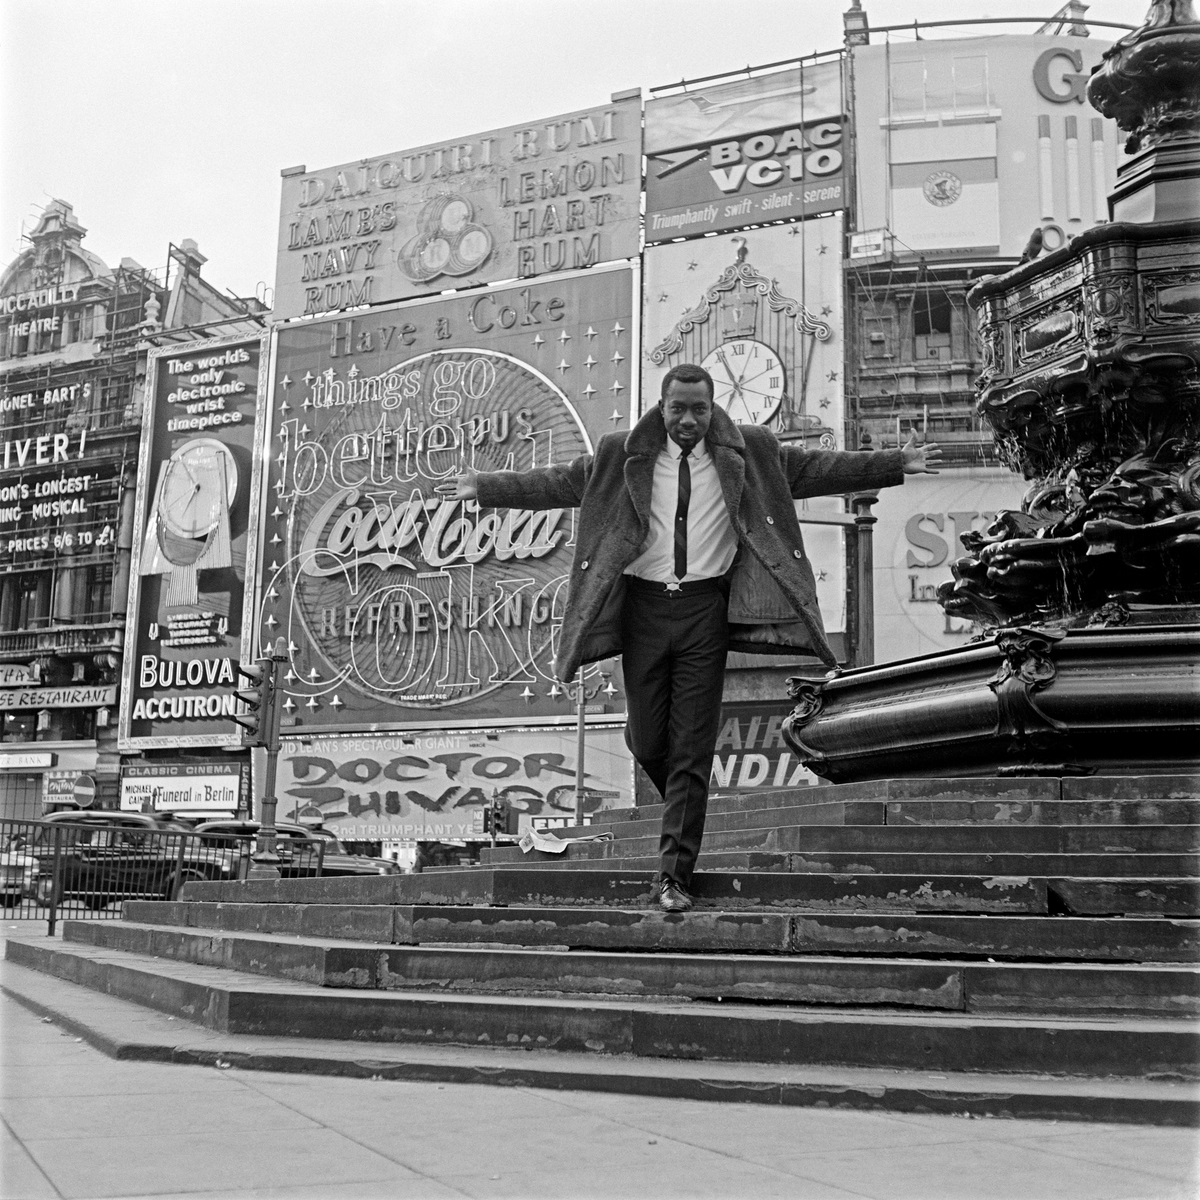 James Barnor, Mike Eghan at Piccadilly Circus, London, 1967, Modern Silver Gelatin Print © James Barnor – Autograph ABP, London